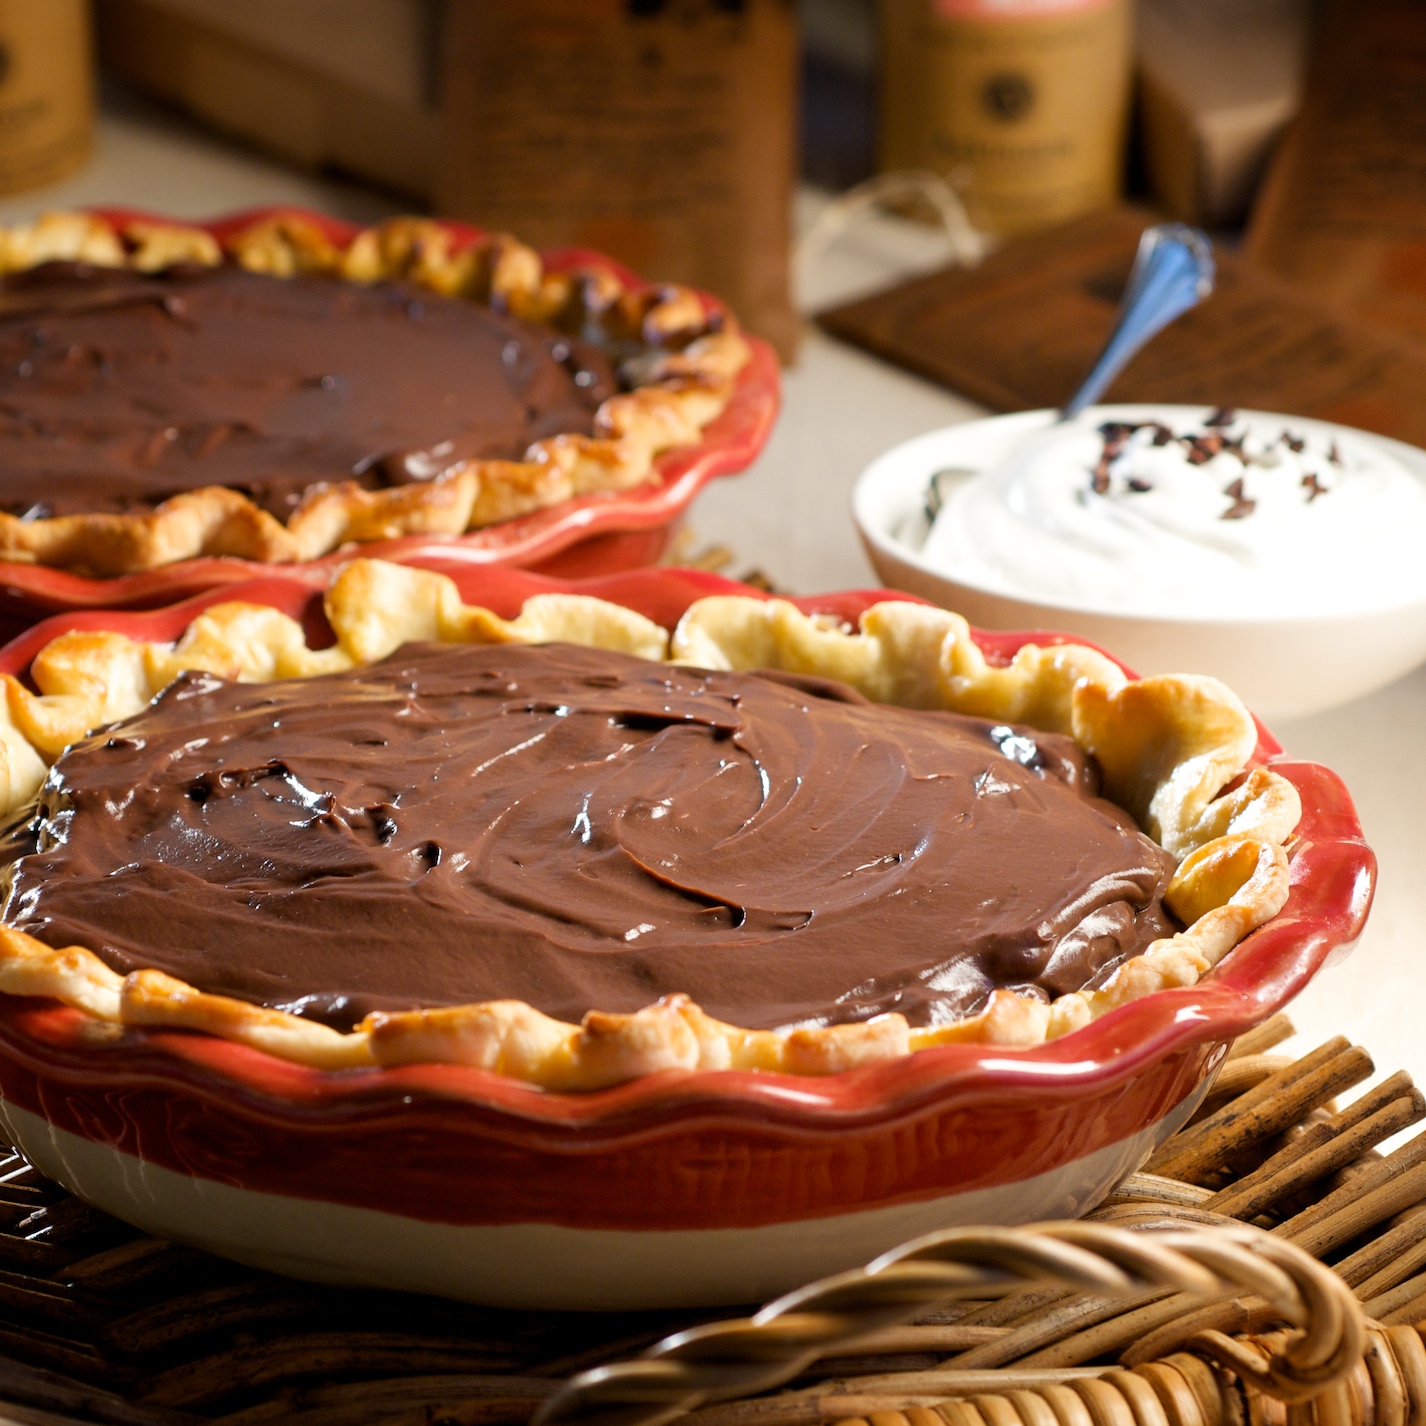 Silky smooth, rich and oh-so-chocolatey, this incredible pie is made with Askinosie Natural Cocoa Powder.